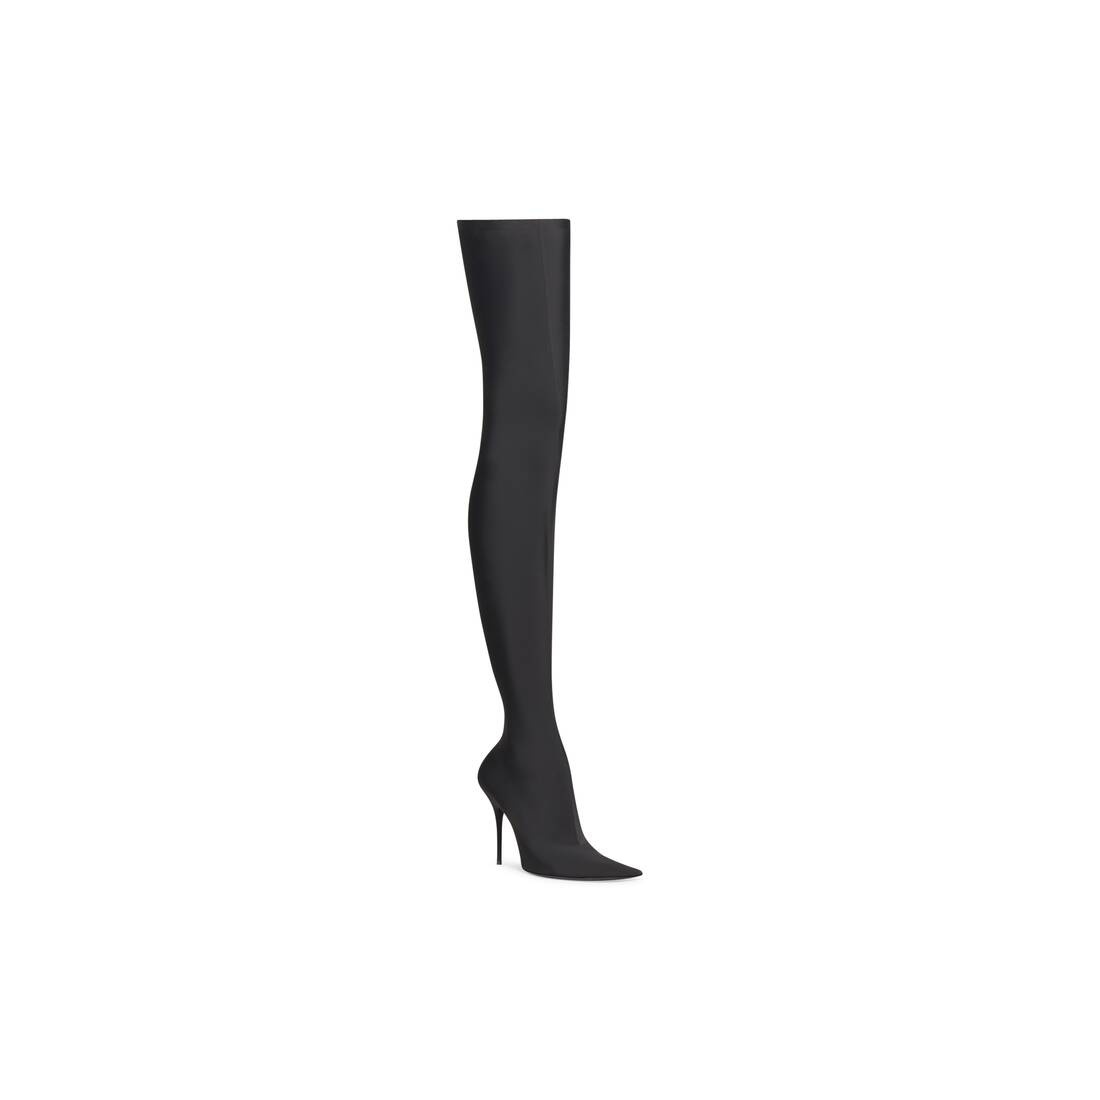 knife 110mm over-the-knee boot - 2